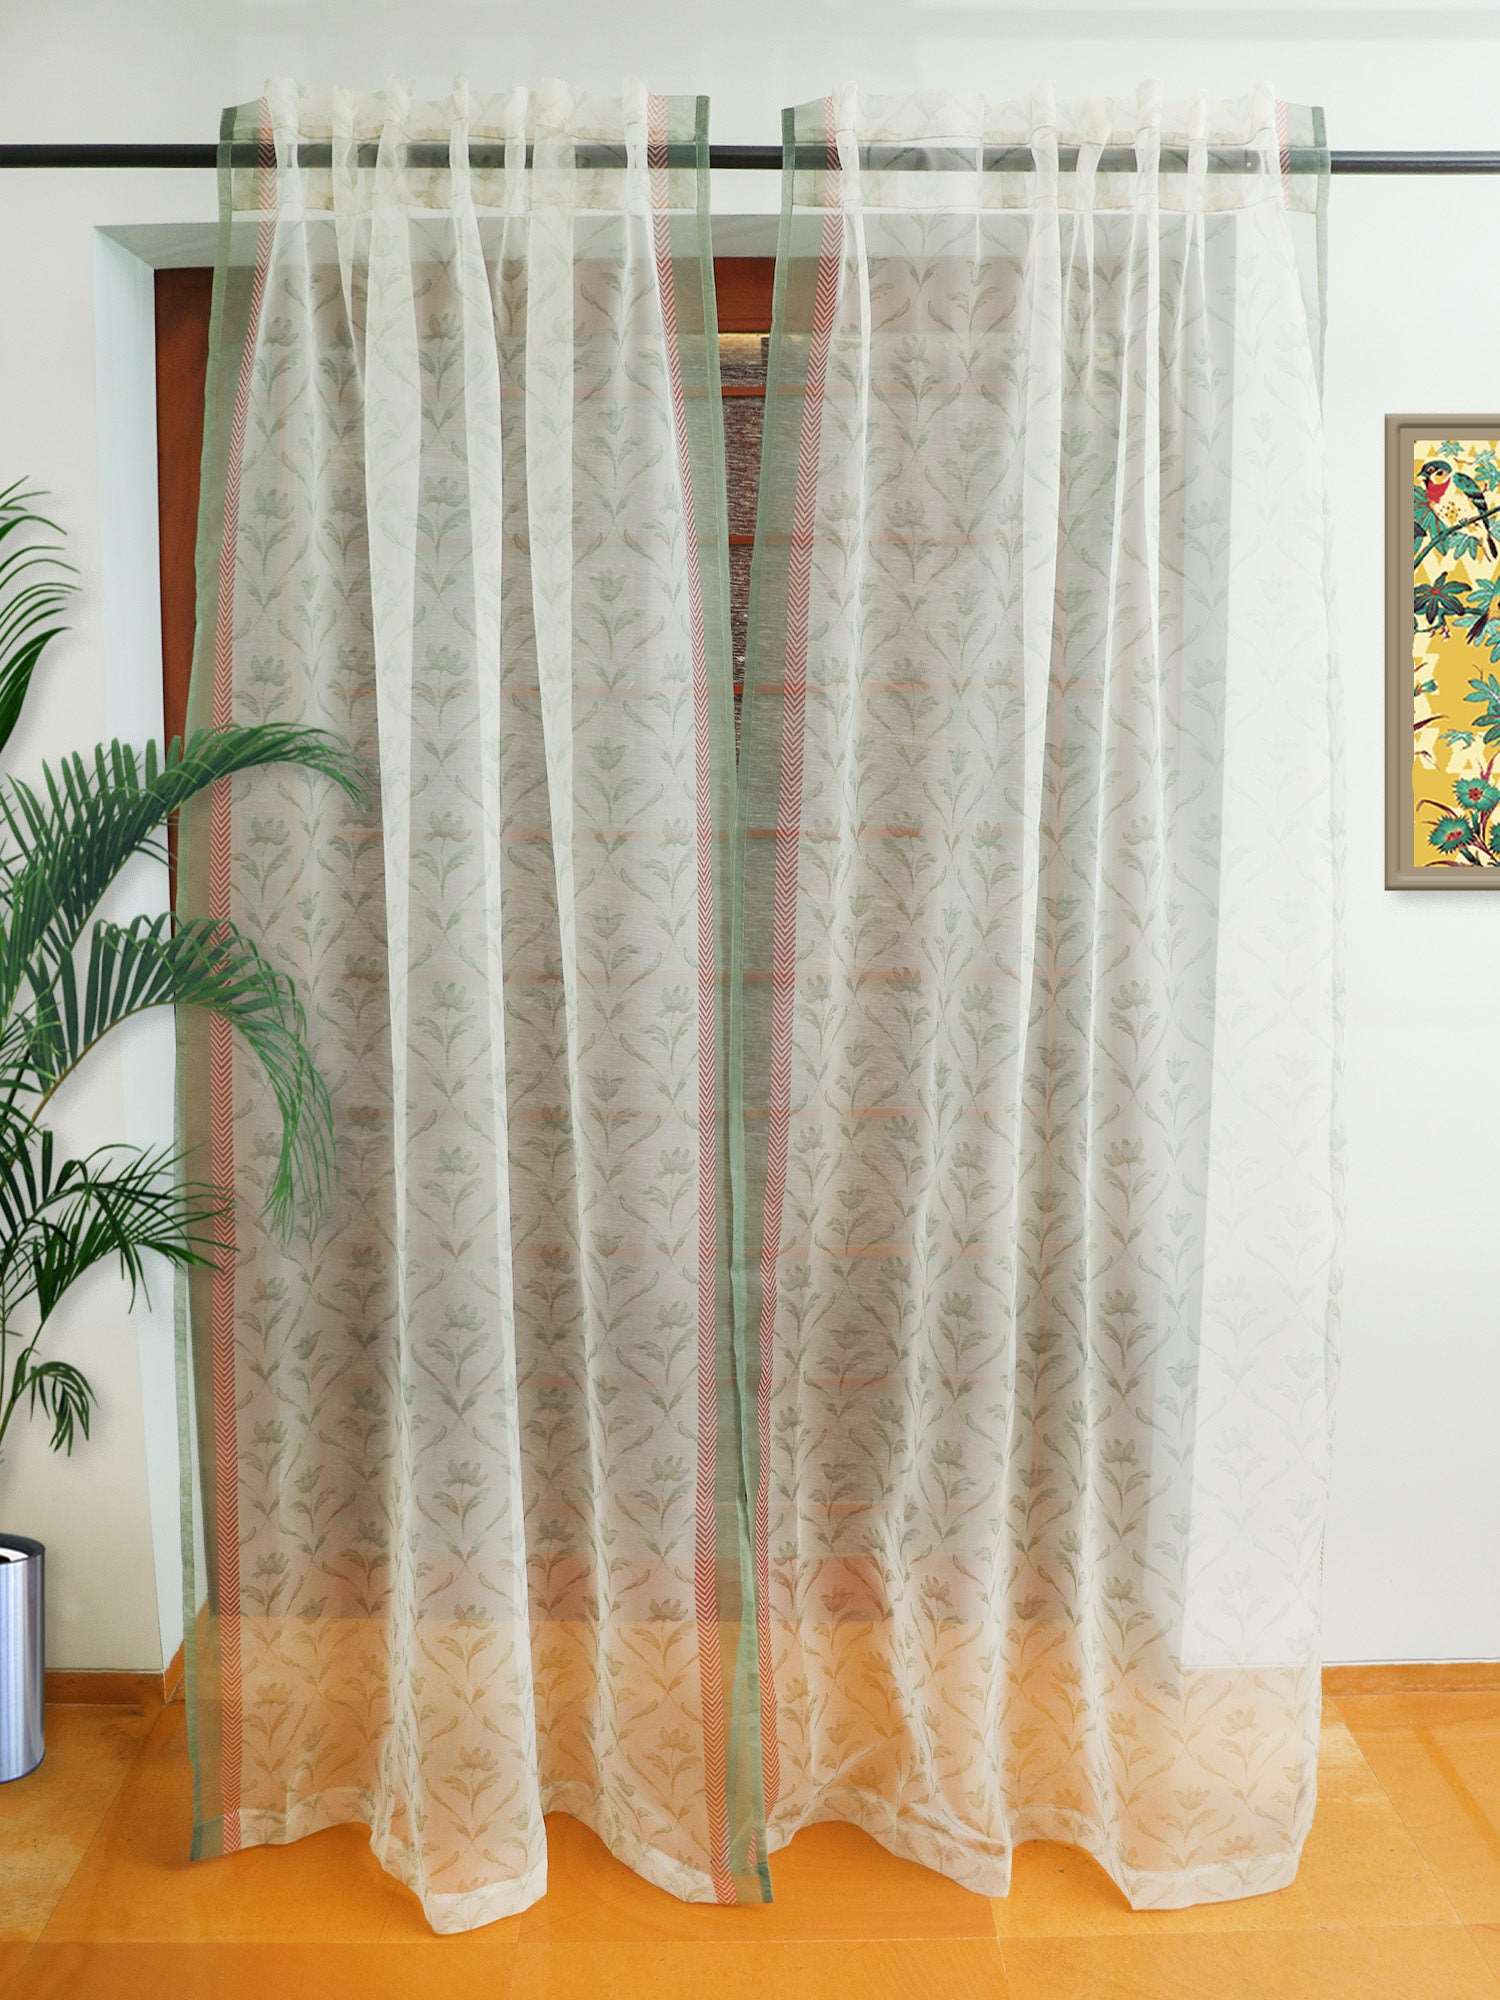 Transparent Organza Sheer Curtain for Door | Bedroom and Living Room | Soft and Light Weight | Floral Printed with Hidden Loop in Multicolor - 50x80 inches (7feet Long) (Pack of 2)